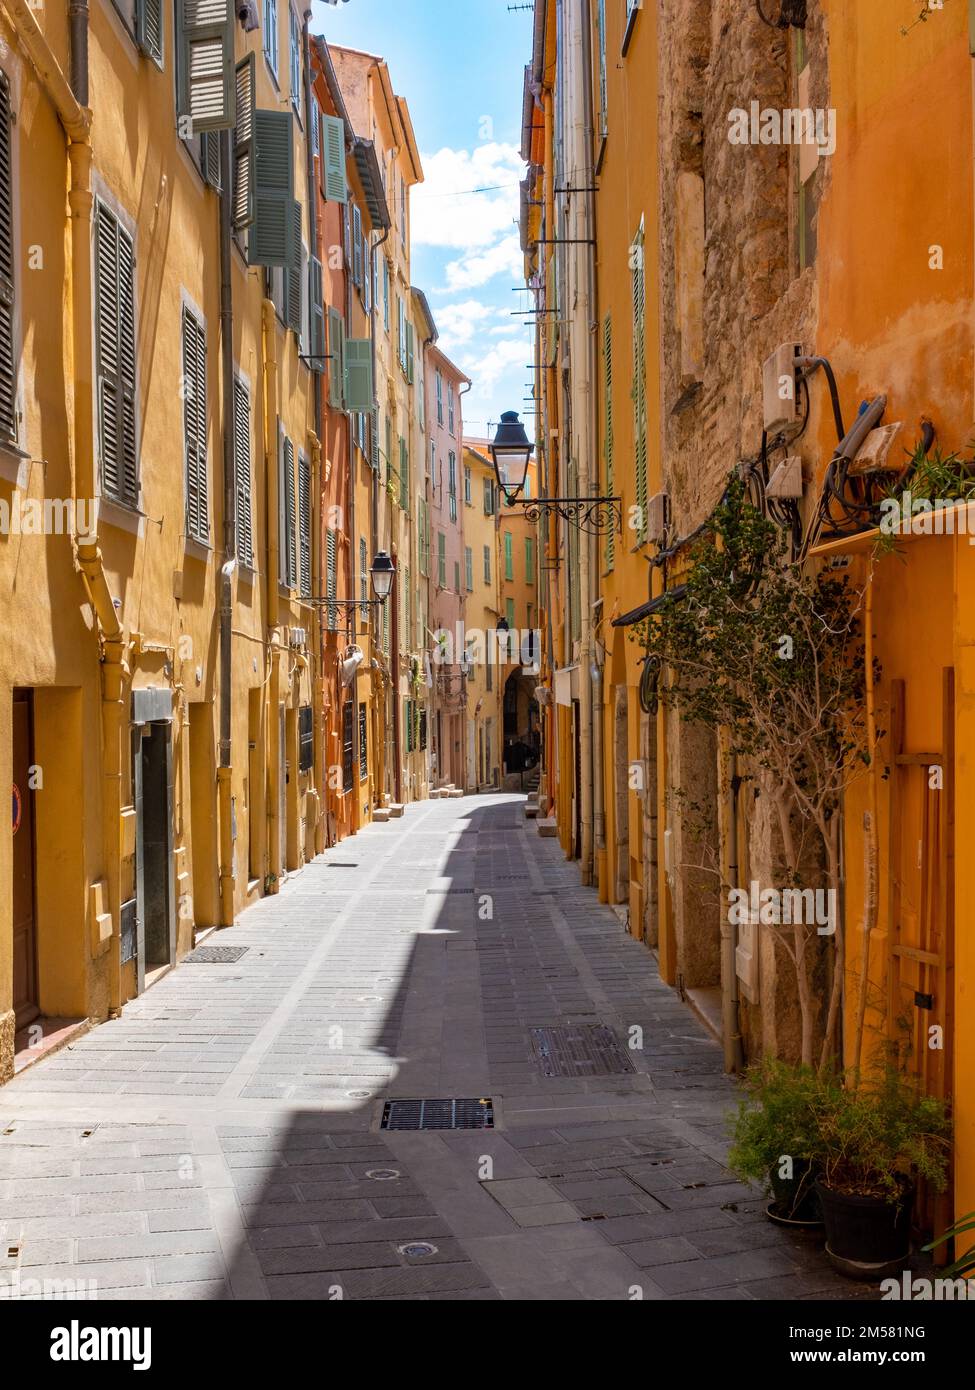 A colourful straight street of the old Menton, France with no people. Taken on a sunny spring day. Stock Photo